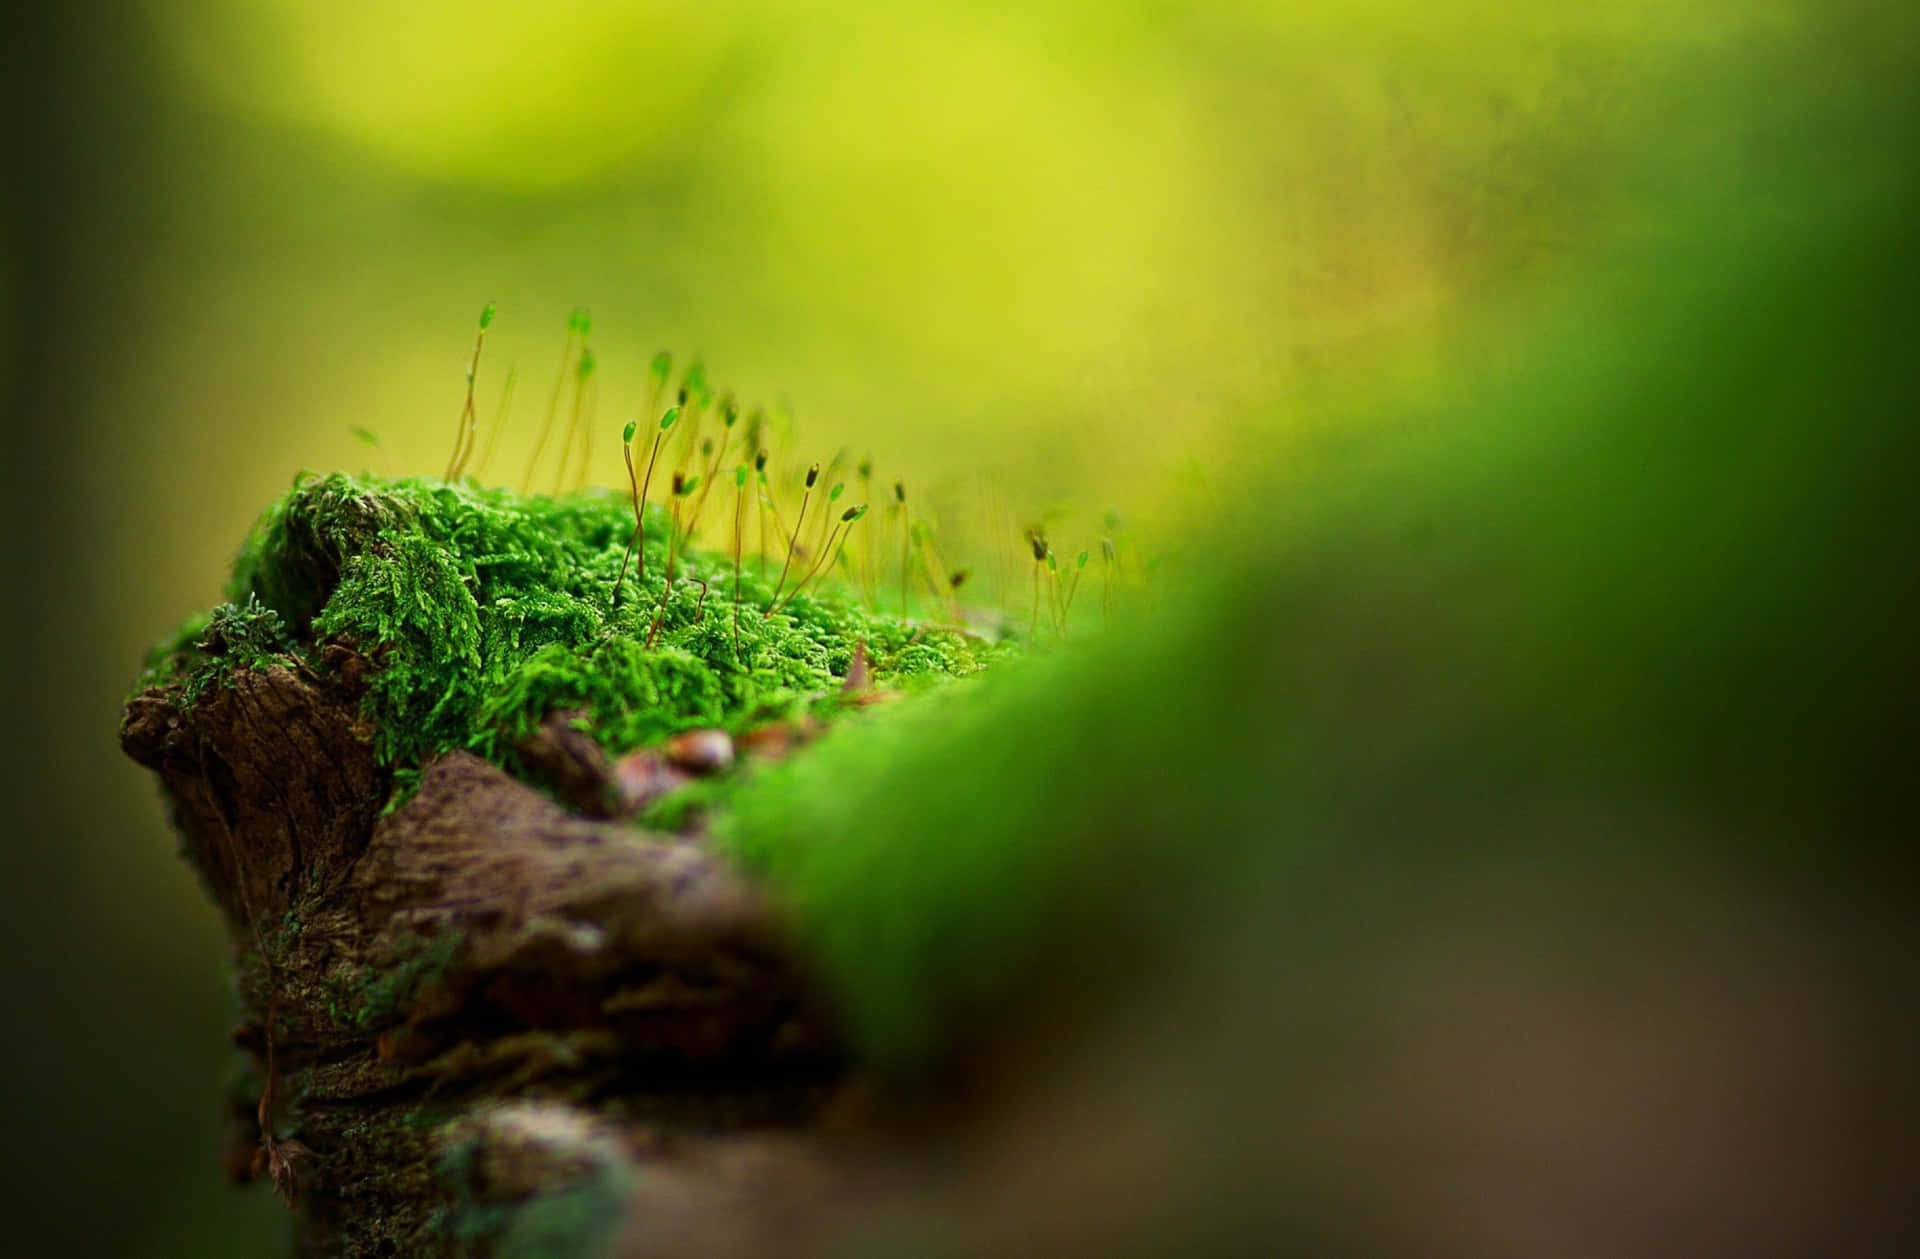 Download A Close Up Of A Green Moss Covered Tree Stump | Wallpapers.com